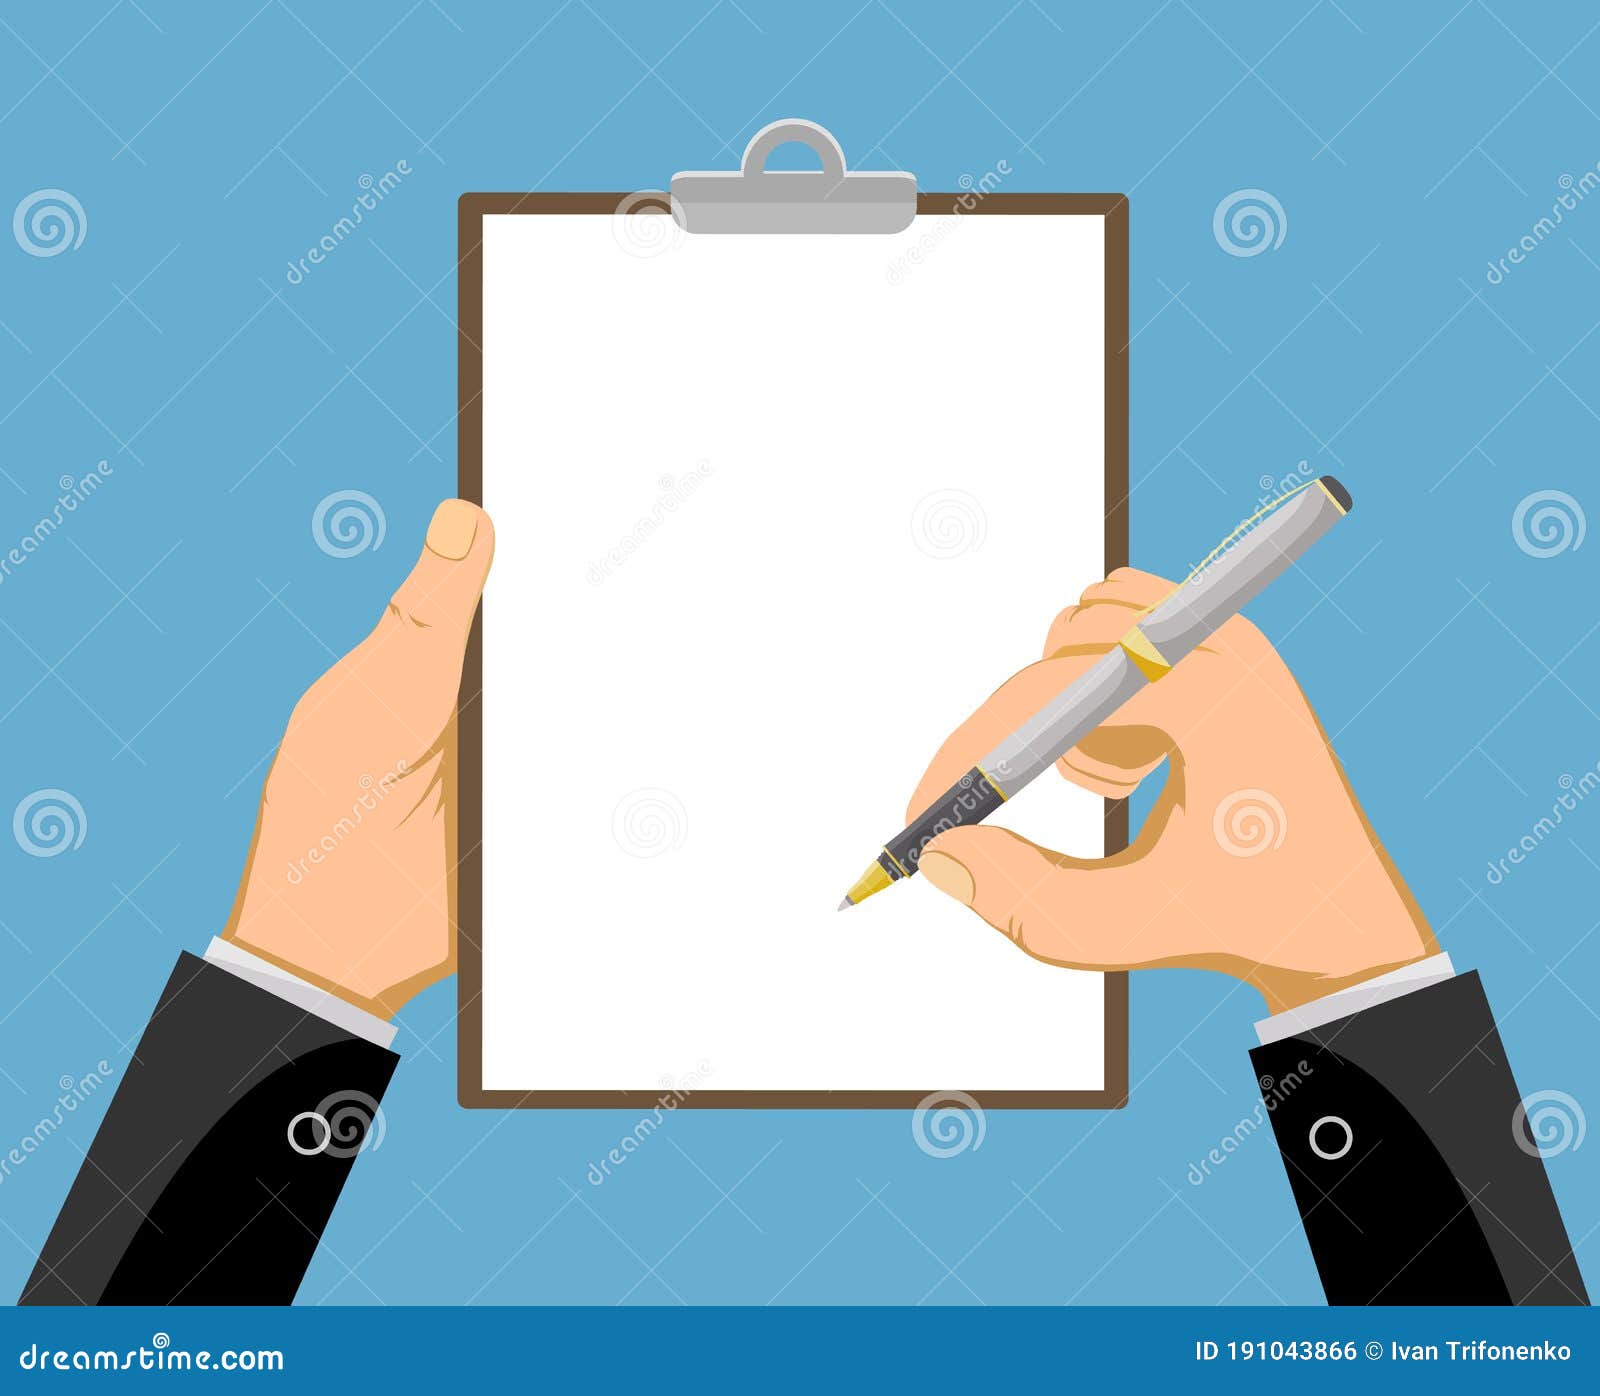 Hands Holding a Clipboard with a Blank Sheet of Paper Stock Vector ...